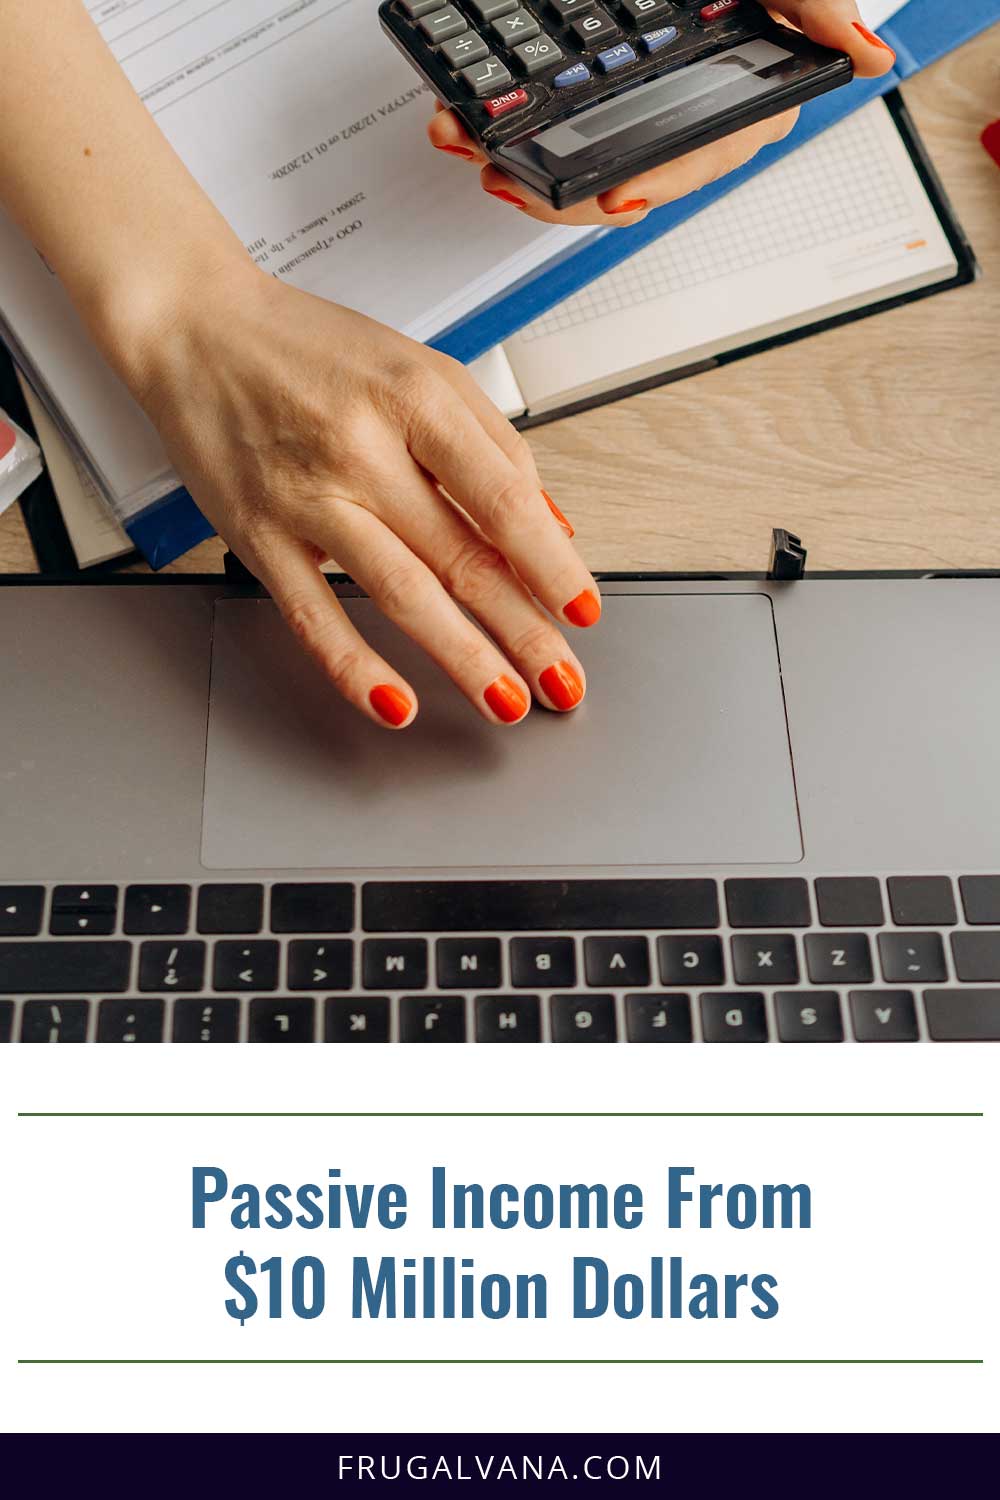 Passive Income From $10 Million Dollars